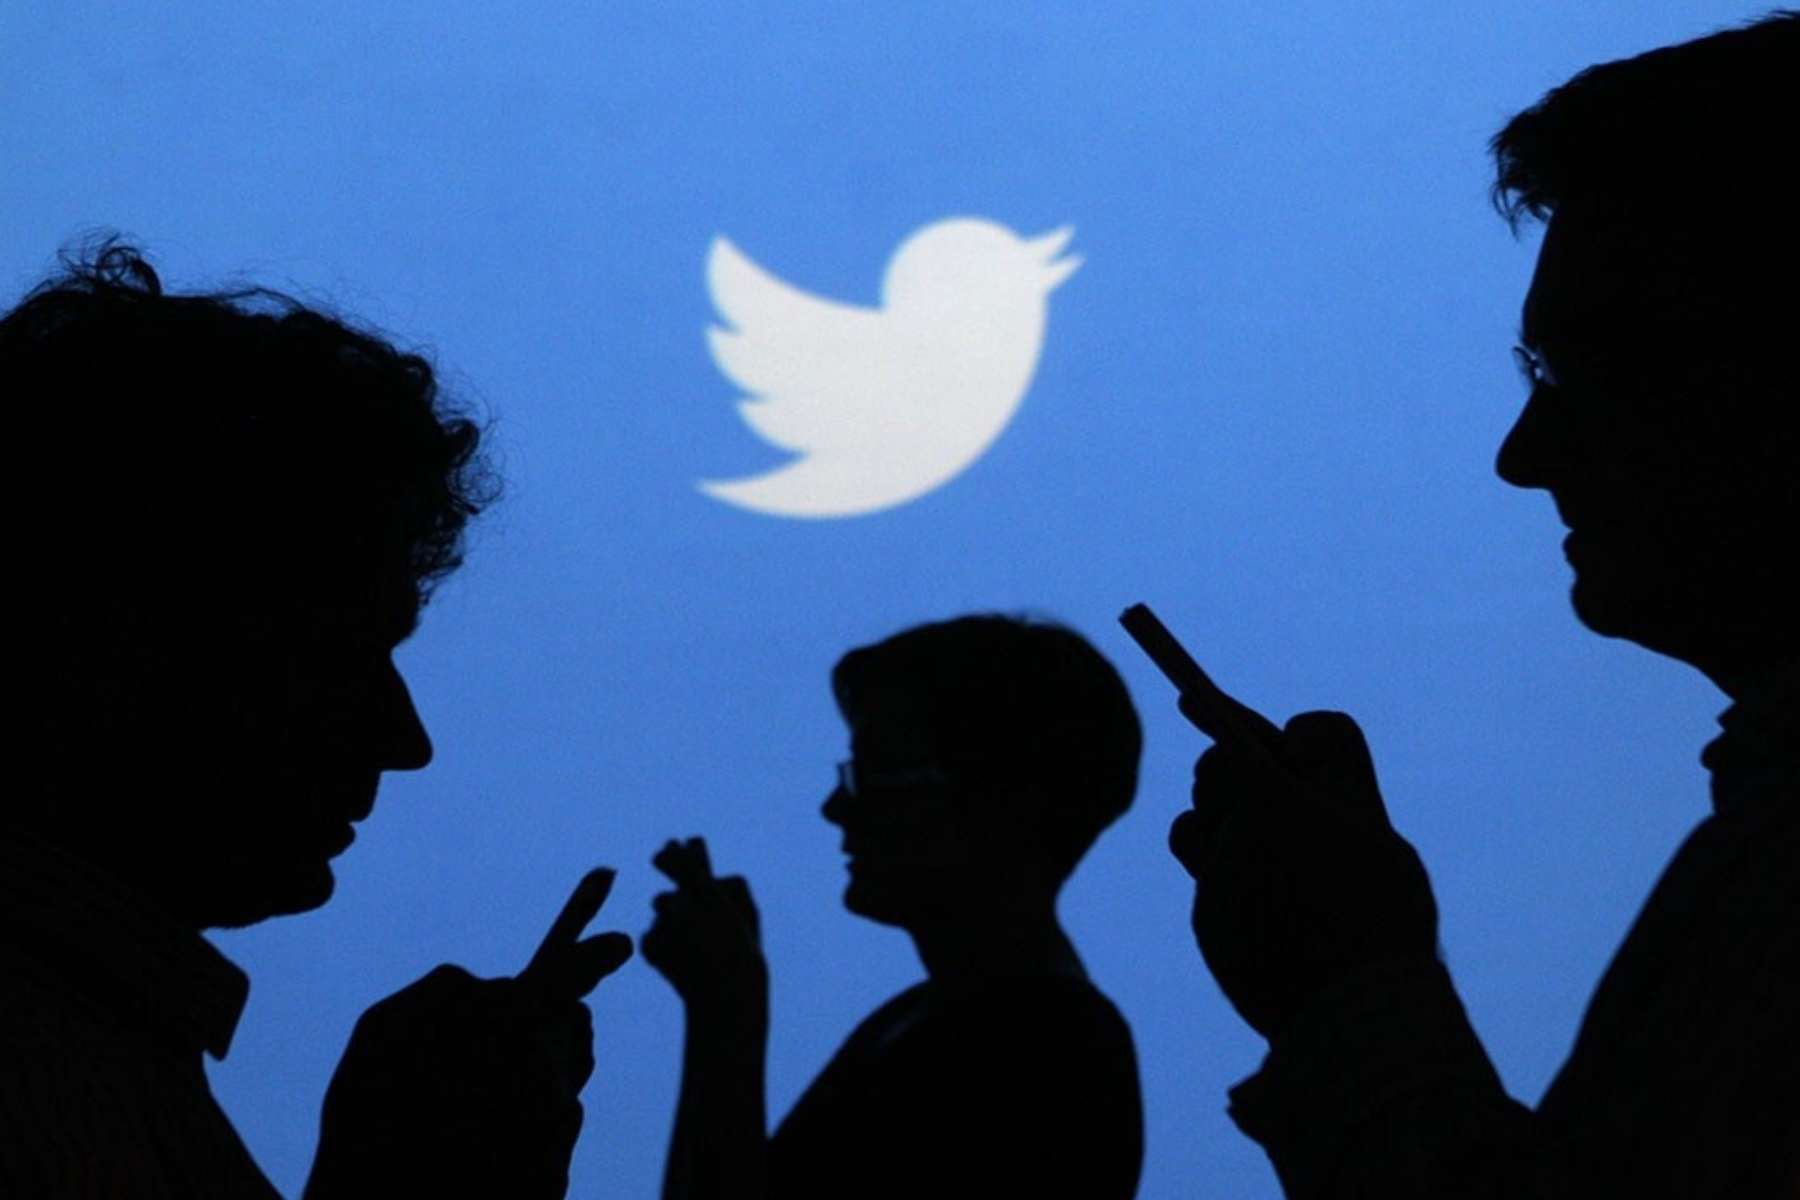 A silhouette of individuals using mobile devices with the Twitter logo